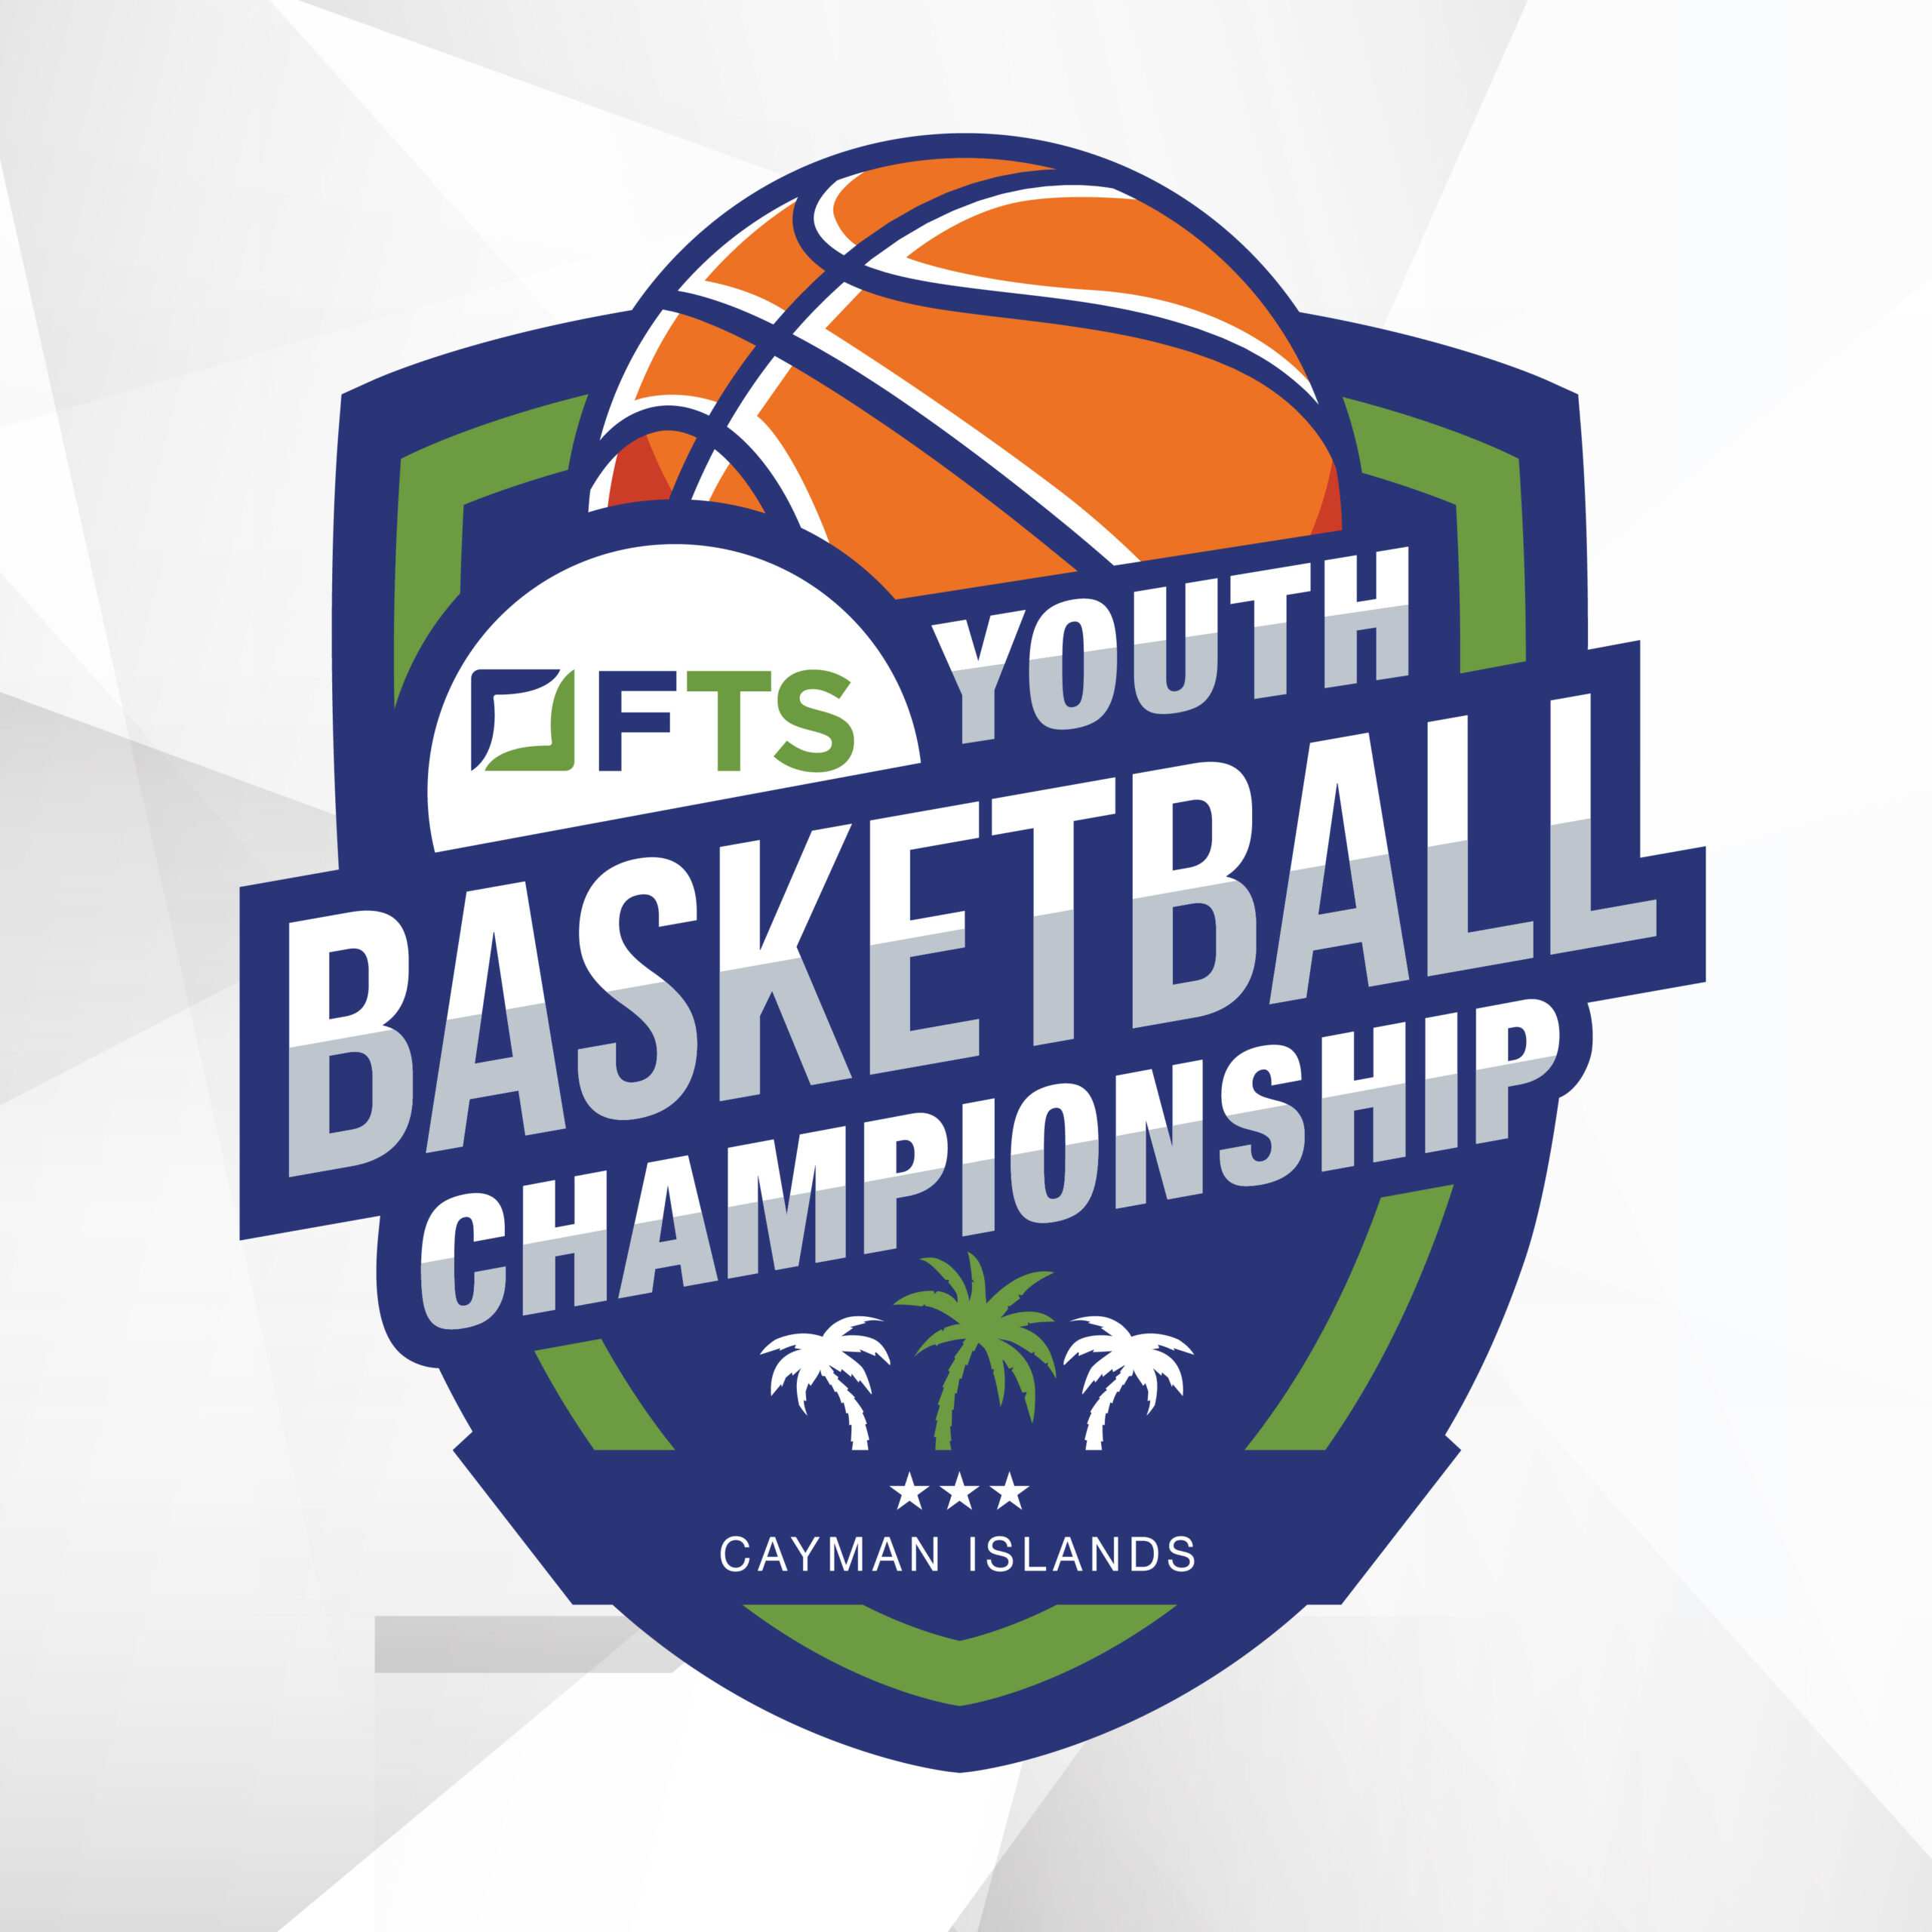 Gallery - FTS Youth Basketball Championship 2022